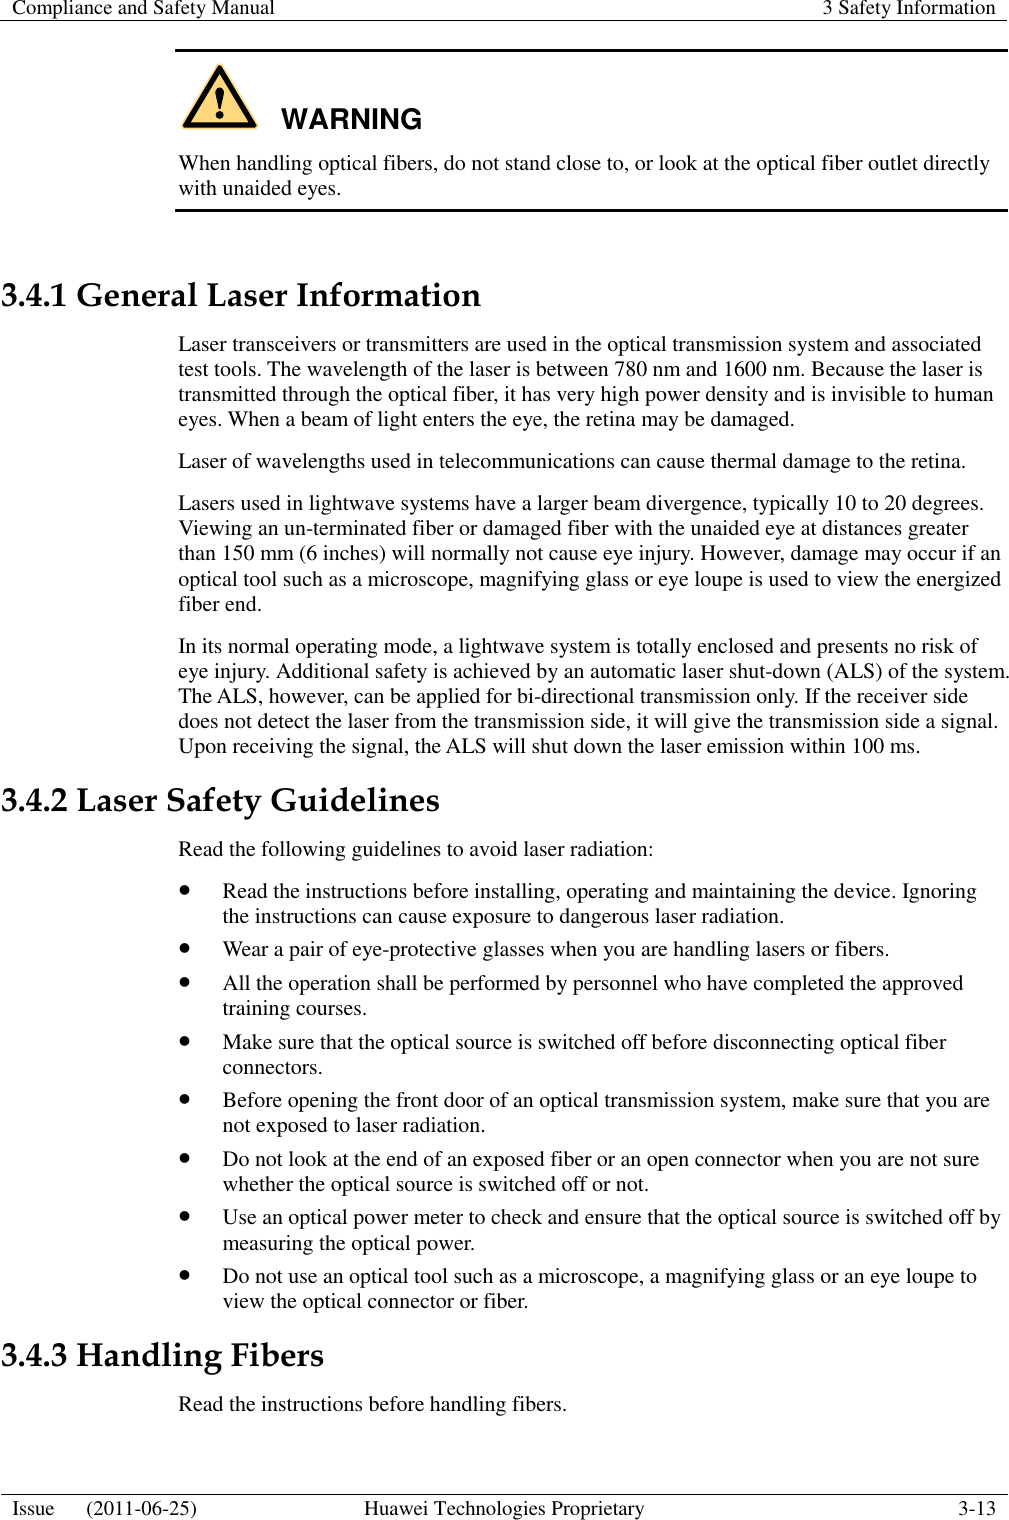 Compliance and Safety Manual 3 Safety Information  Issue      (2011-06-25) Huawei Technologies Proprietary 3-13  WARNING When handling optical fibers, do not stand close to, or look at the optical fiber outlet directly with unaided eyes.  3.4.1 General Laser Information Laser transceivers or transmitters are used in the optical transmission system and associated test tools. The wavelength of the laser is between 780 nm and 1600 nm. Because the laser is transmitted through the optical fiber, it has very high power density and is invisible to human eyes. When a beam of light enters the eye, the retina may be damaged. Laser of wavelengths used in telecommunications can cause thermal damage to the retina. Lasers used in lightwave systems have a larger beam divergence, typically 10 to 20 degrees. Viewing an un-terminated fiber or damaged fiber with the unaided eye at distances greater than 150 mm (6 inches) will normally not cause eye injury. However, damage may occur if an optical tool such as a microscope, magnifying glass or eye loupe is used to view the energized fiber end. In its normal operating mode, a lightwave system is totally enclosed and presents no risk of eye injury. Additional safety is achieved by an automatic laser shut-down (ALS) of the system. The ALS, however, can be applied for bi-directional transmission only. If the receiver side does not detect the laser from the transmission side, it will give the transmission side a signal. Upon receiving the signal, the ALS will shut down the laser emission within 100 ms. 3.4.2 Laser Safety Guidelines Read the following guidelines to avoid laser radiation:  Read the instructions before installing, operating and maintaining the device. Ignoring the instructions can cause exposure to dangerous laser radiation.  Wear a pair of eye-protective glasses when you are handling lasers or fibers.  All the operation shall be performed by personnel who have completed the approved training courses.  Make sure that the optical source is switched off before disconnecting optical fiber connectors.  Before opening the front door of an optical transmission system, make sure that you are not exposed to laser radiation.  Do not look at the end of an exposed fiber or an open connector when you are not sure whether the optical source is switched off or not.  Use an optical power meter to check and ensure that the optical source is switched off by measuring the optical power.  Do not use an optical tool such as a microscope, a magnifying glass or an eye loupe to view the optical connector or fiber. 3.4.3 Handling Fibers Read the instructions before handling fibers. 